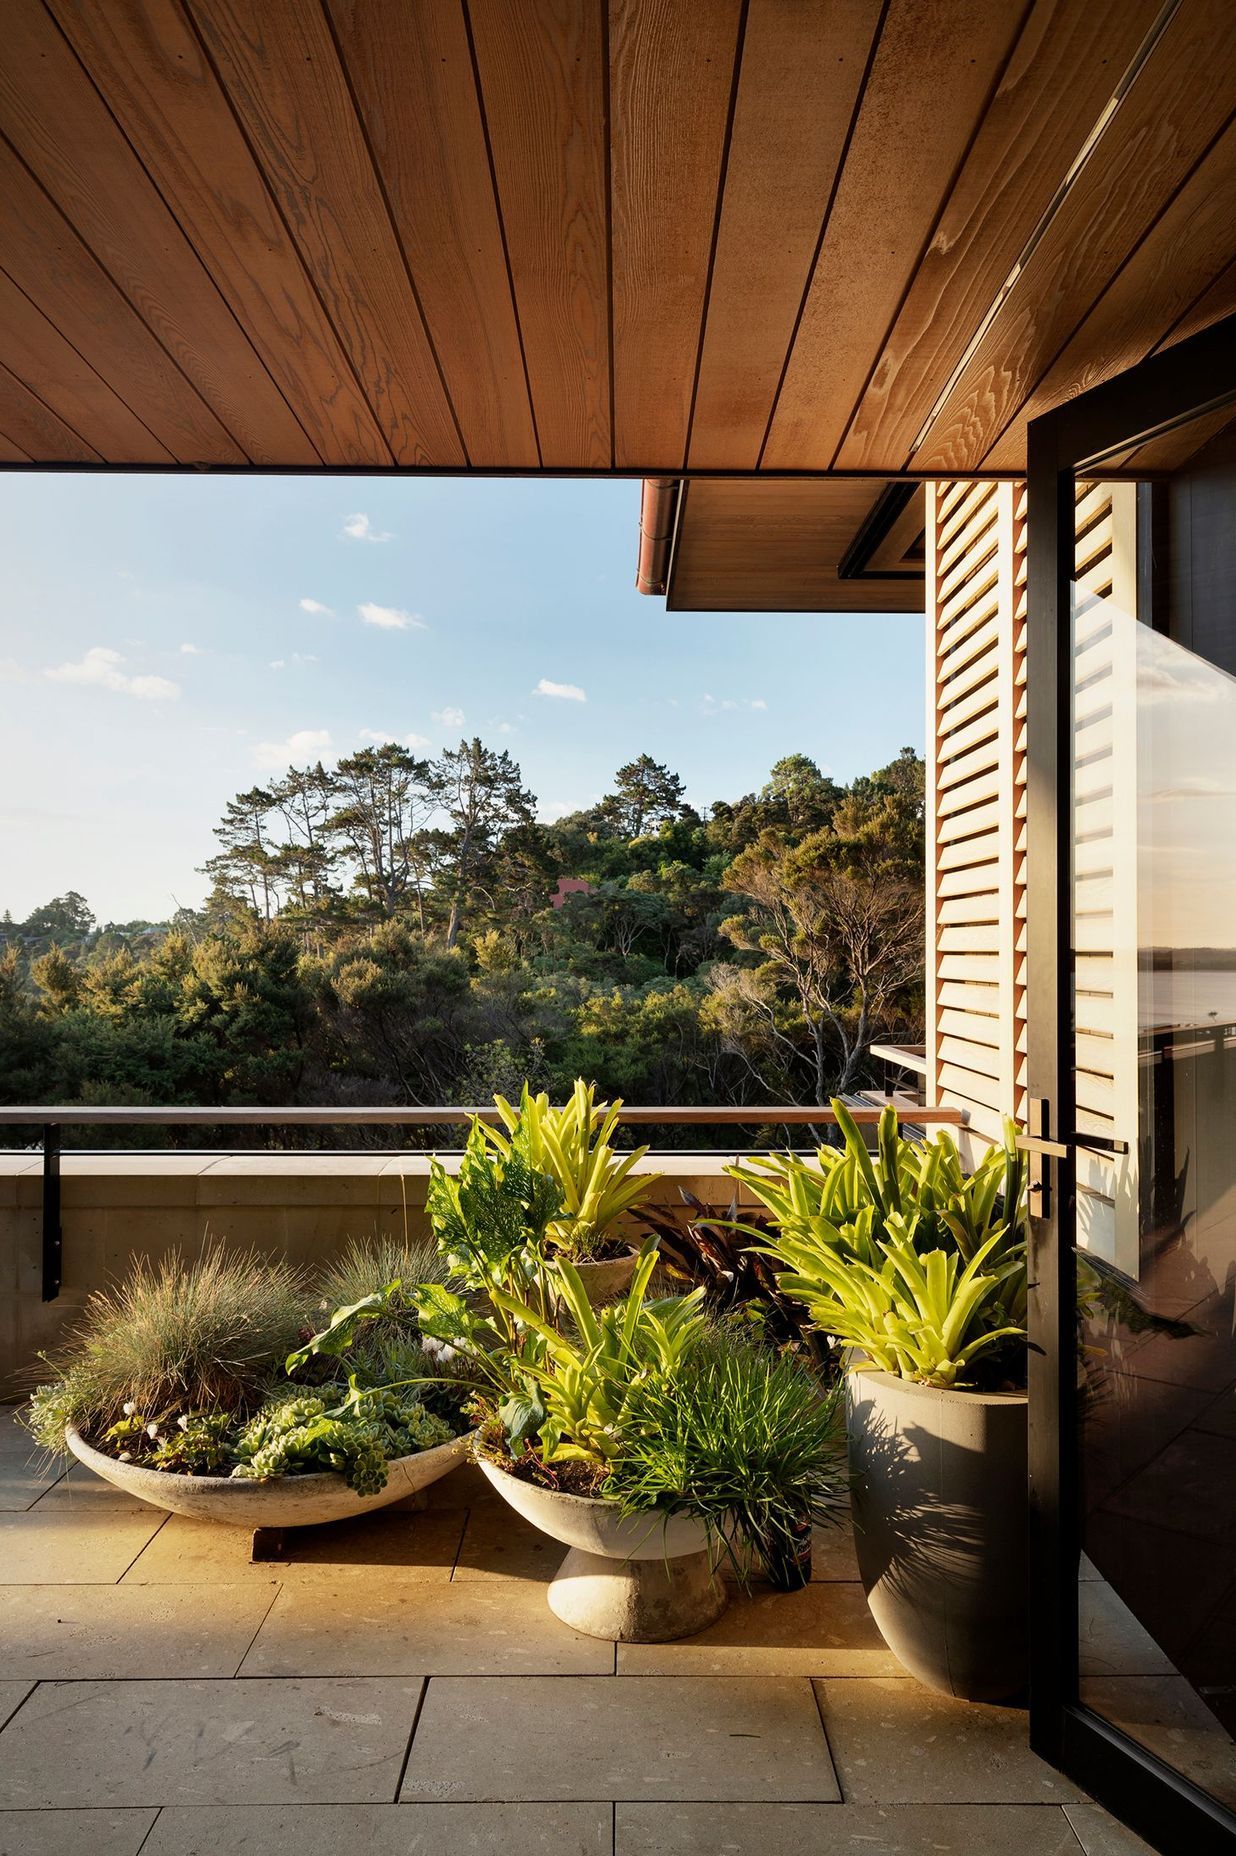 Potted plants blend the terrace in with the view of rejuvenating bush.